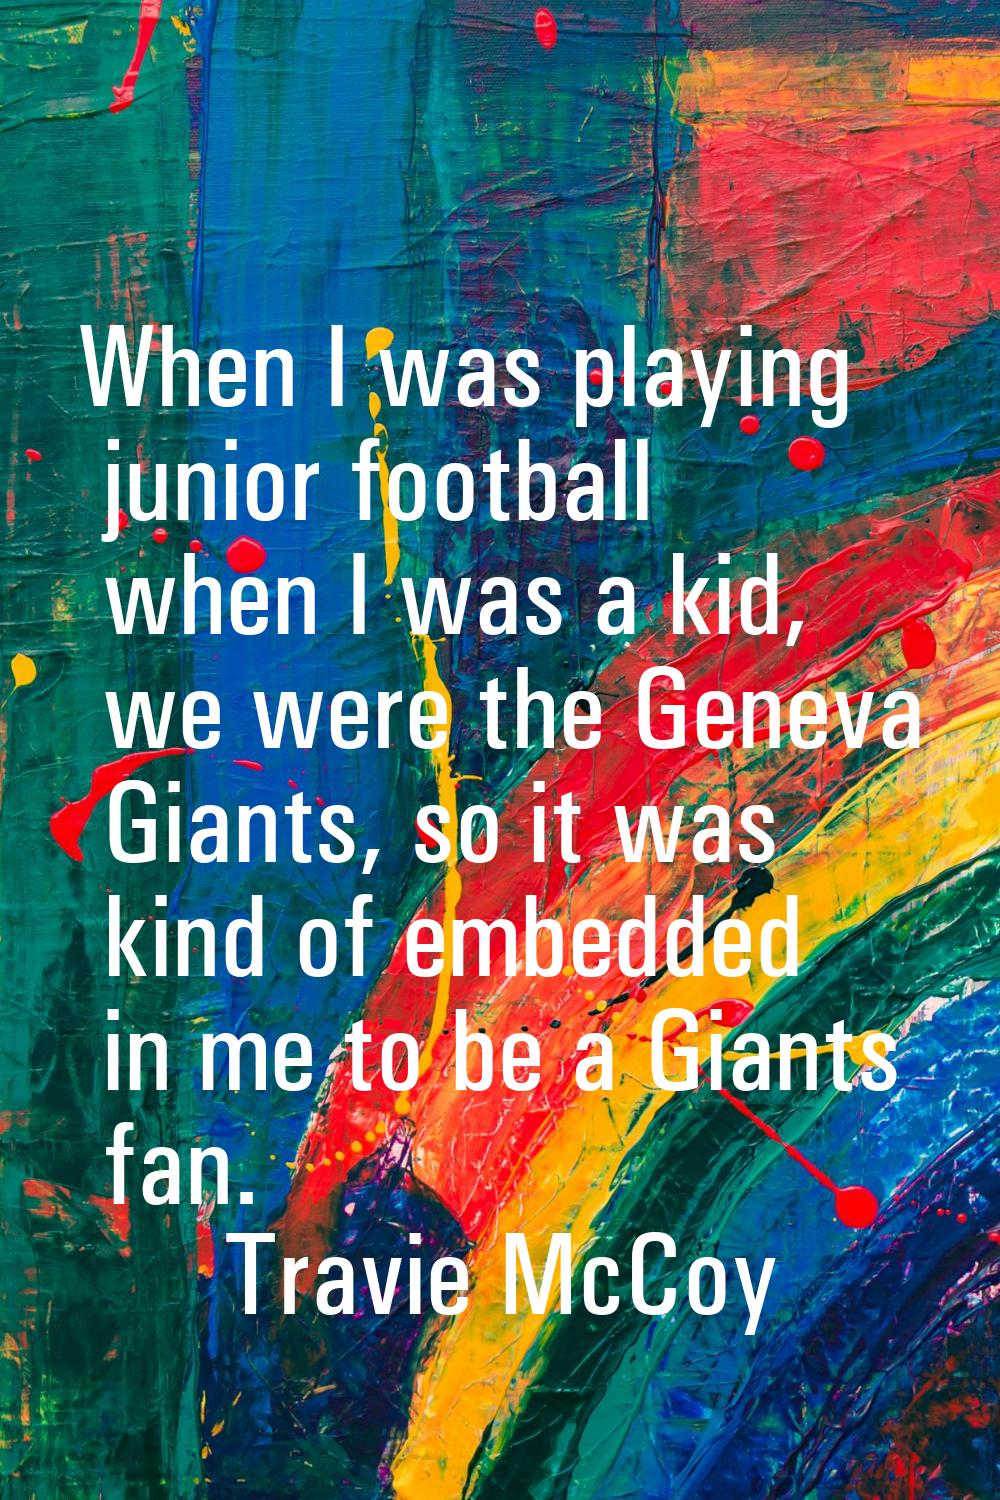 When I was playing junior football when I was a kid, we were the Geneva Giants, so it was kind of e